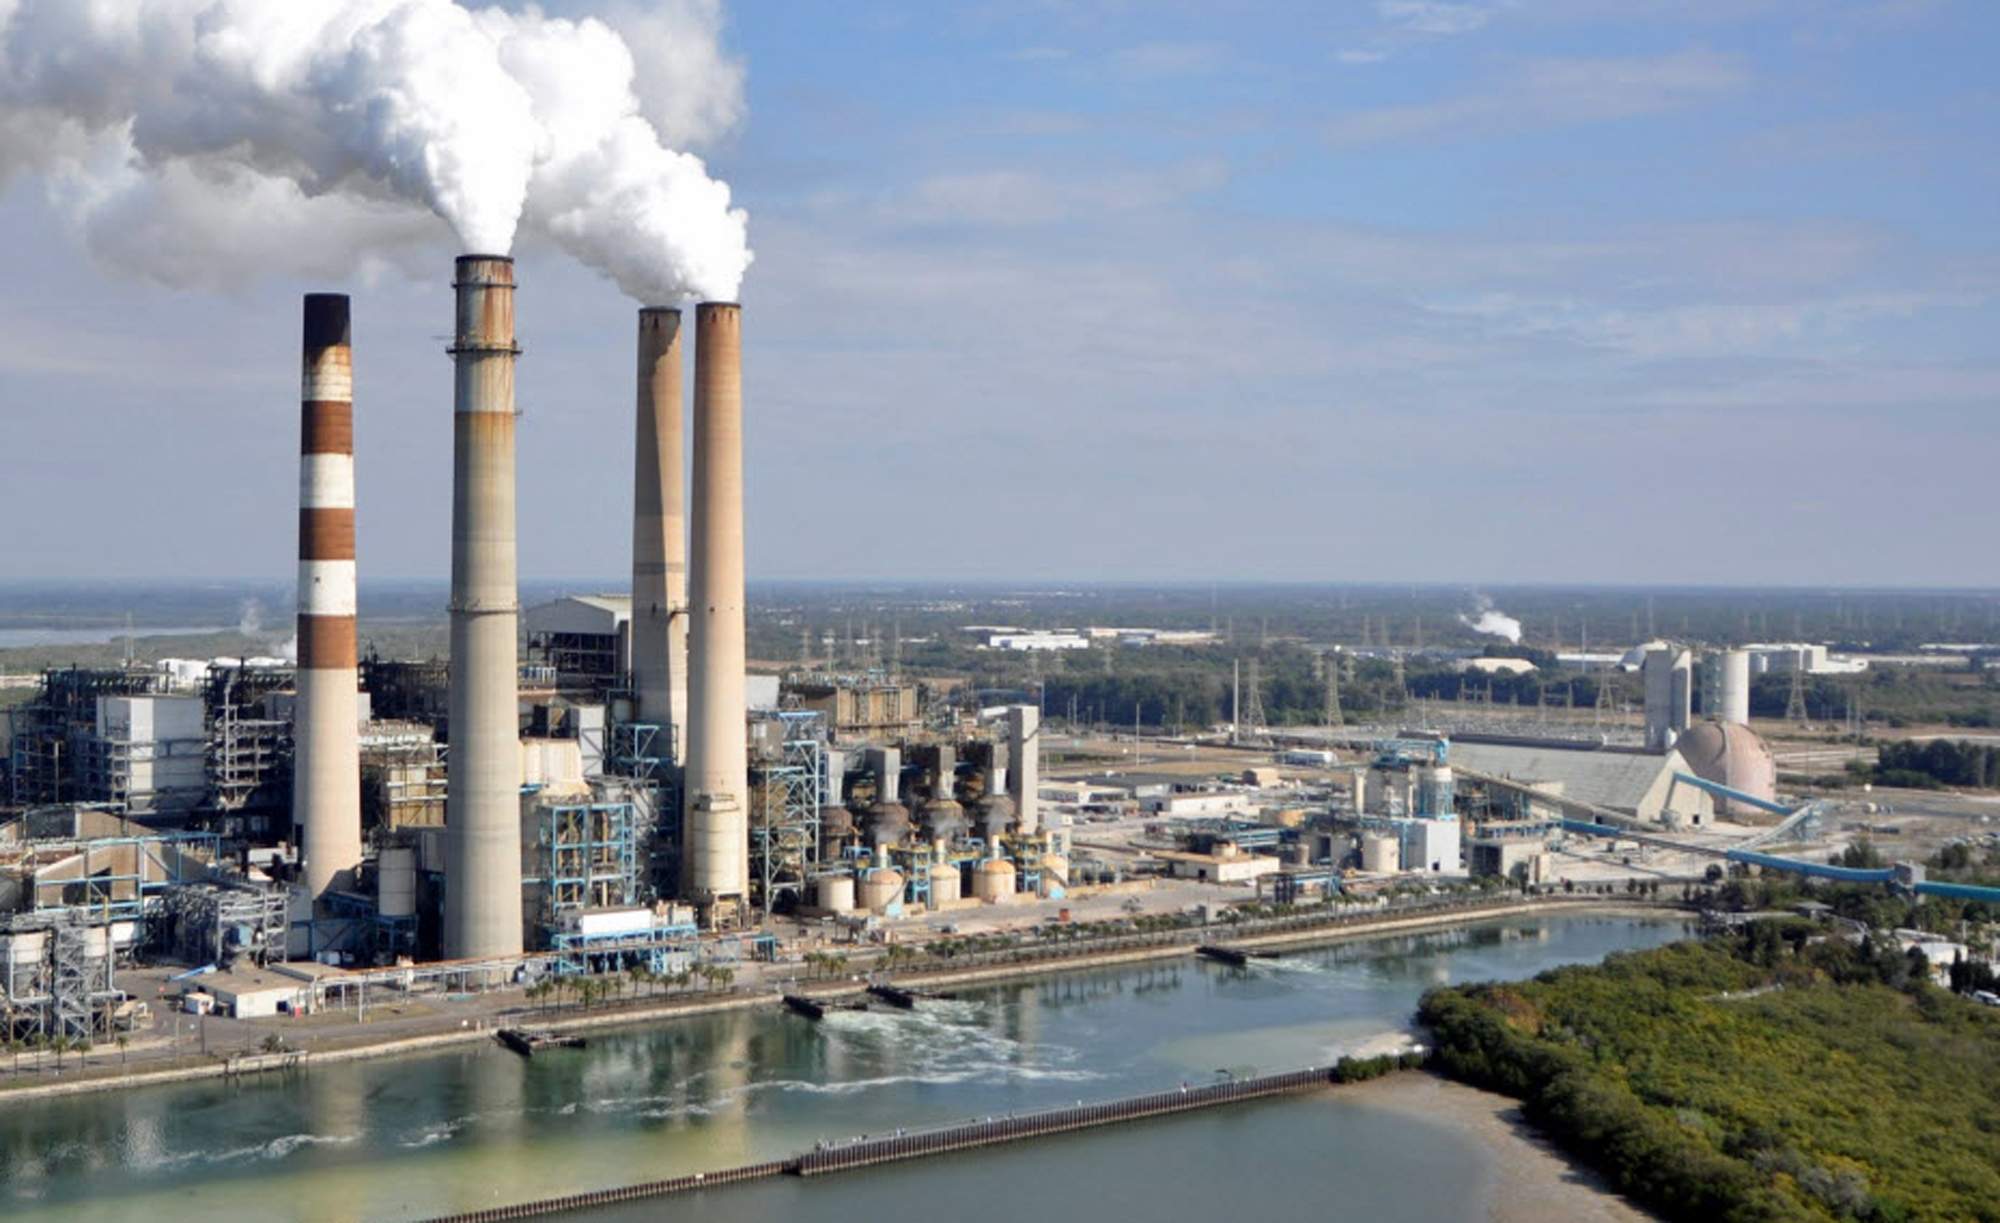 TECO sentenced in deaths of 5 workers at Big Bend Power Station